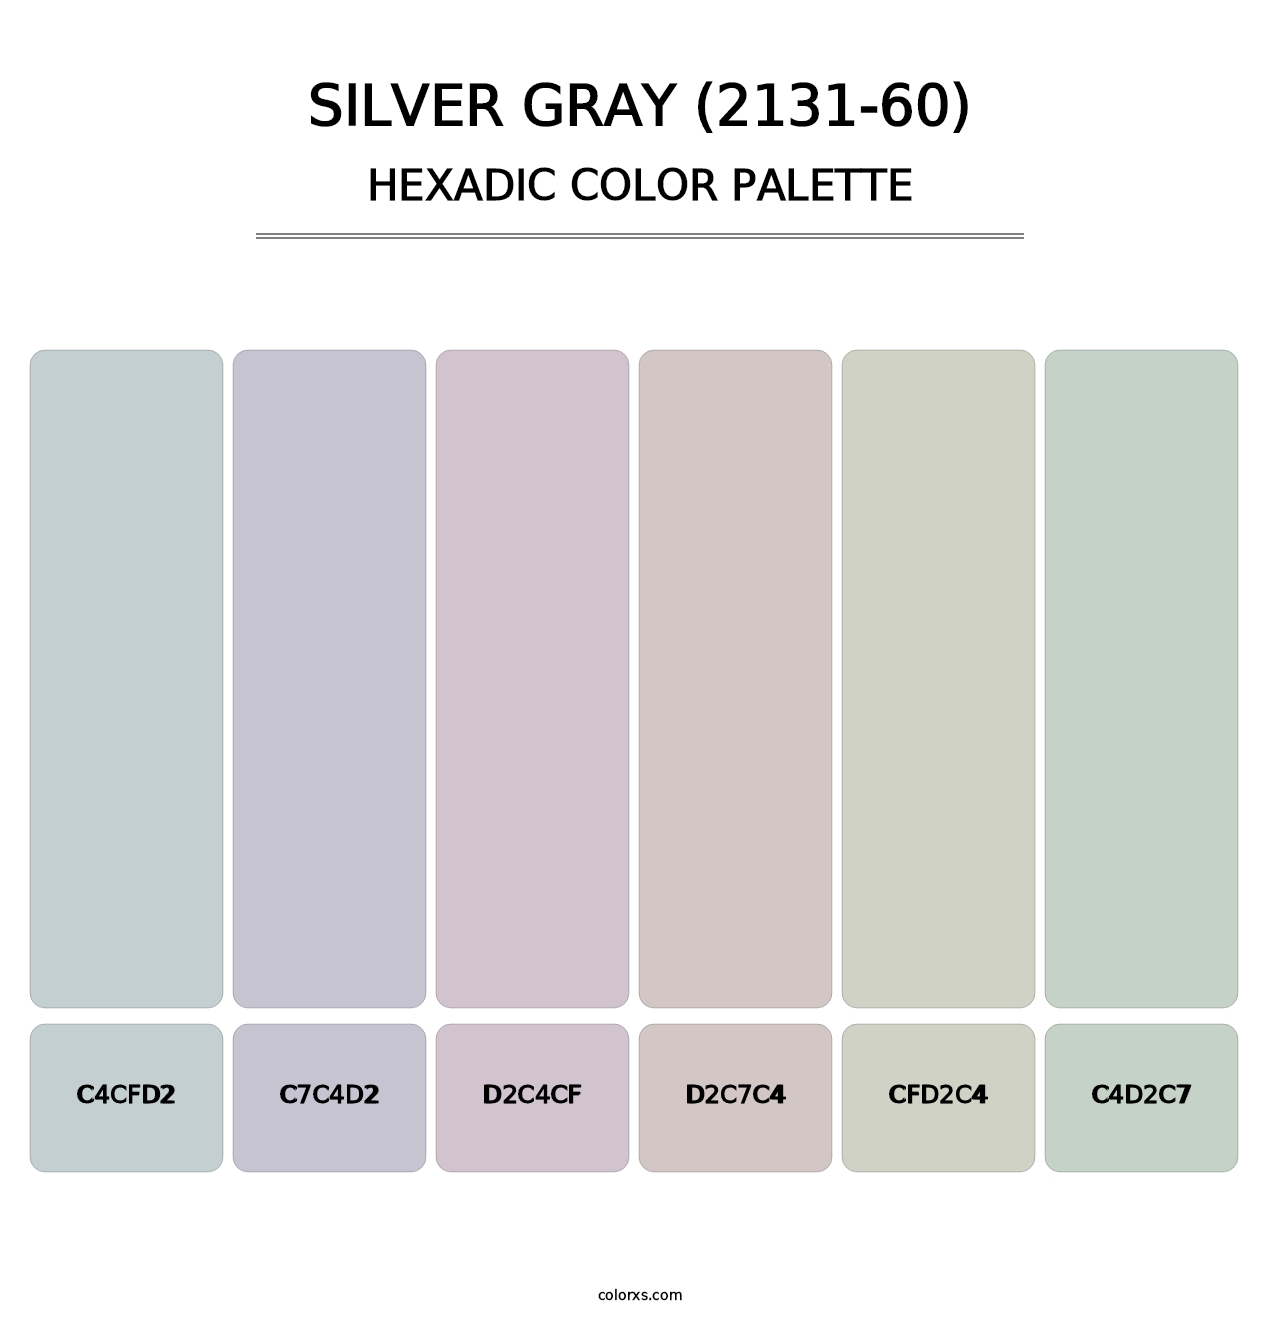 Silver Gray (2131-60) - Hexadic Color Palette